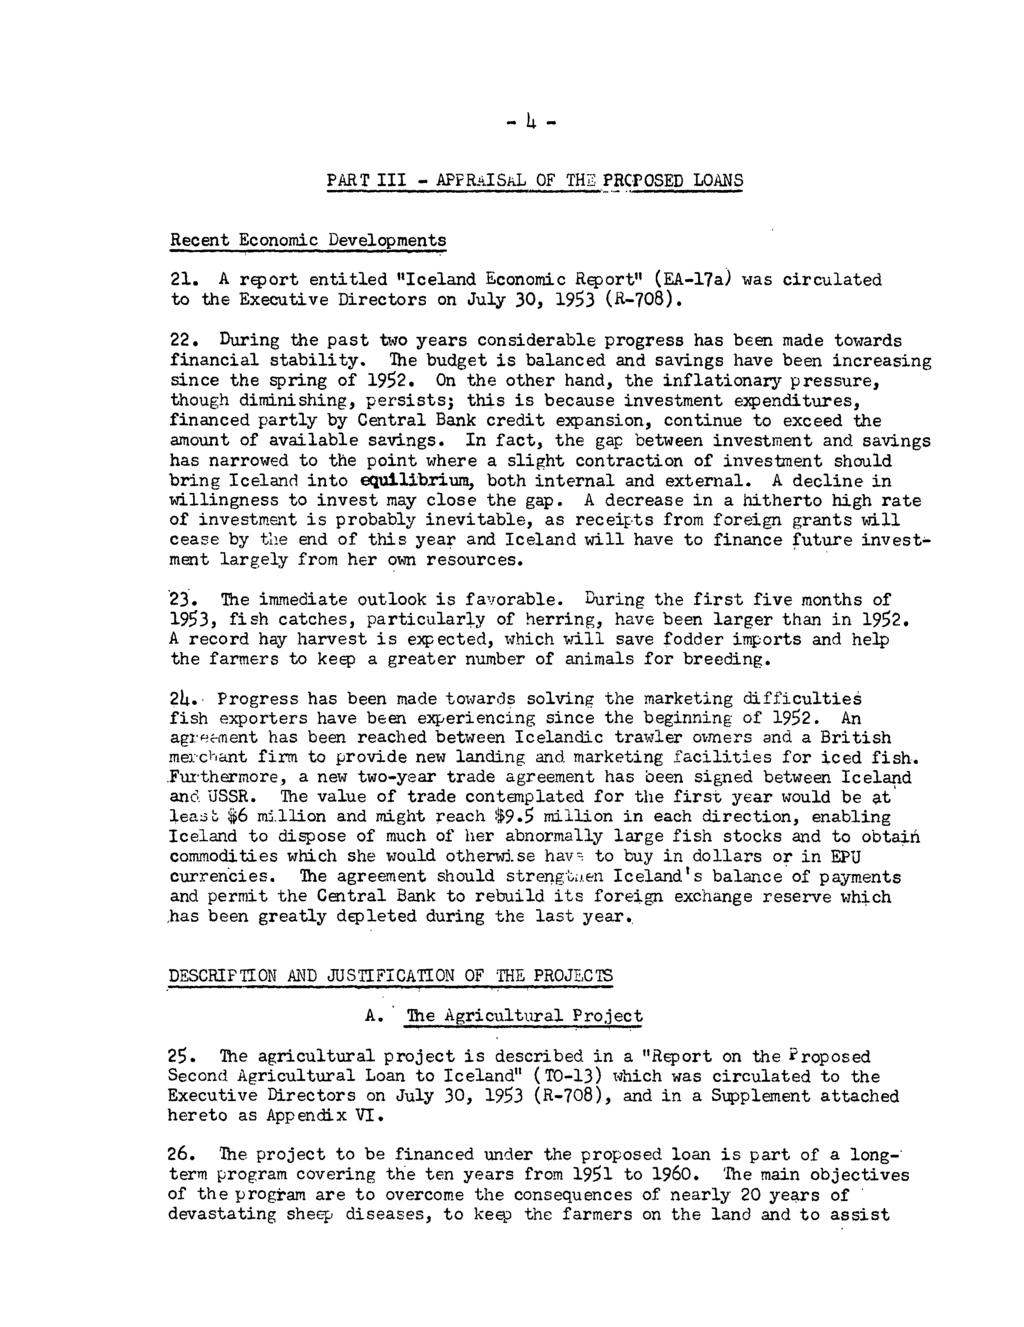 PART III - APFRfiISkL OF TH- PRCPOSED LOANS Recent Economic Developments 21. A report entitled "Iceland Economic Report" (EA-17a) was circulated to the Executive Directors on July 30, 1953 (R-708).